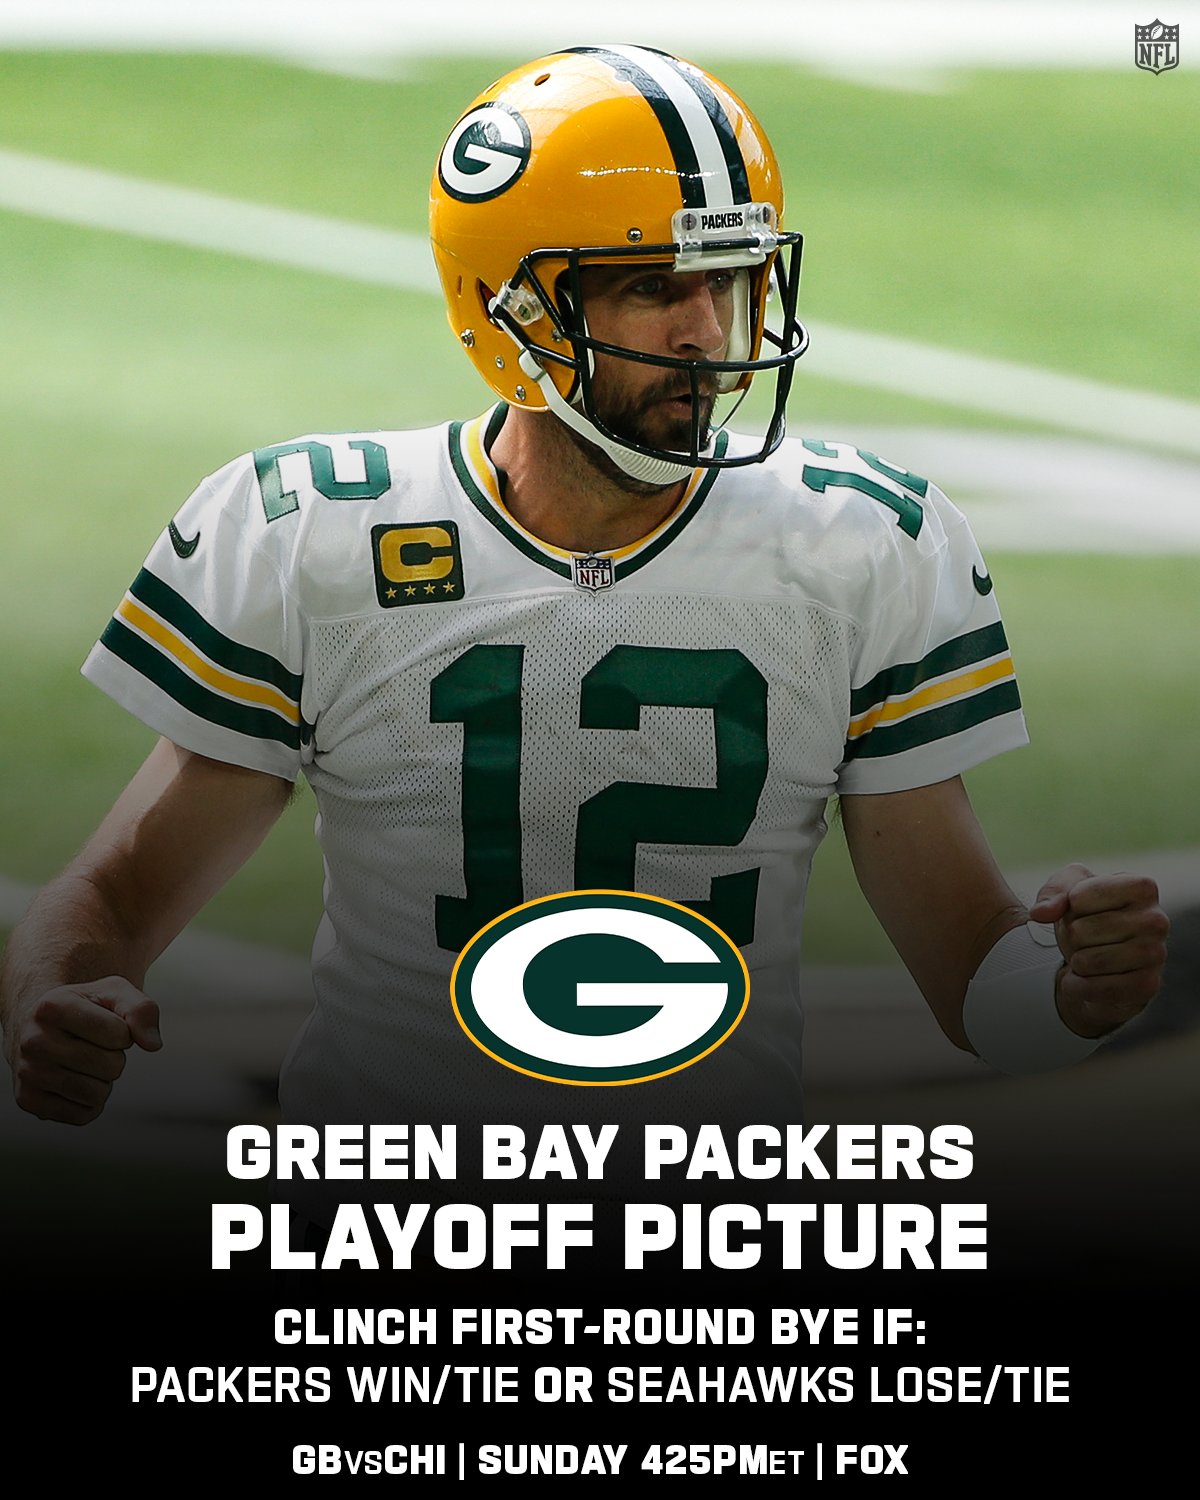 NFL on Twitter: 'The @packers can lock up the NFC's top seed and a